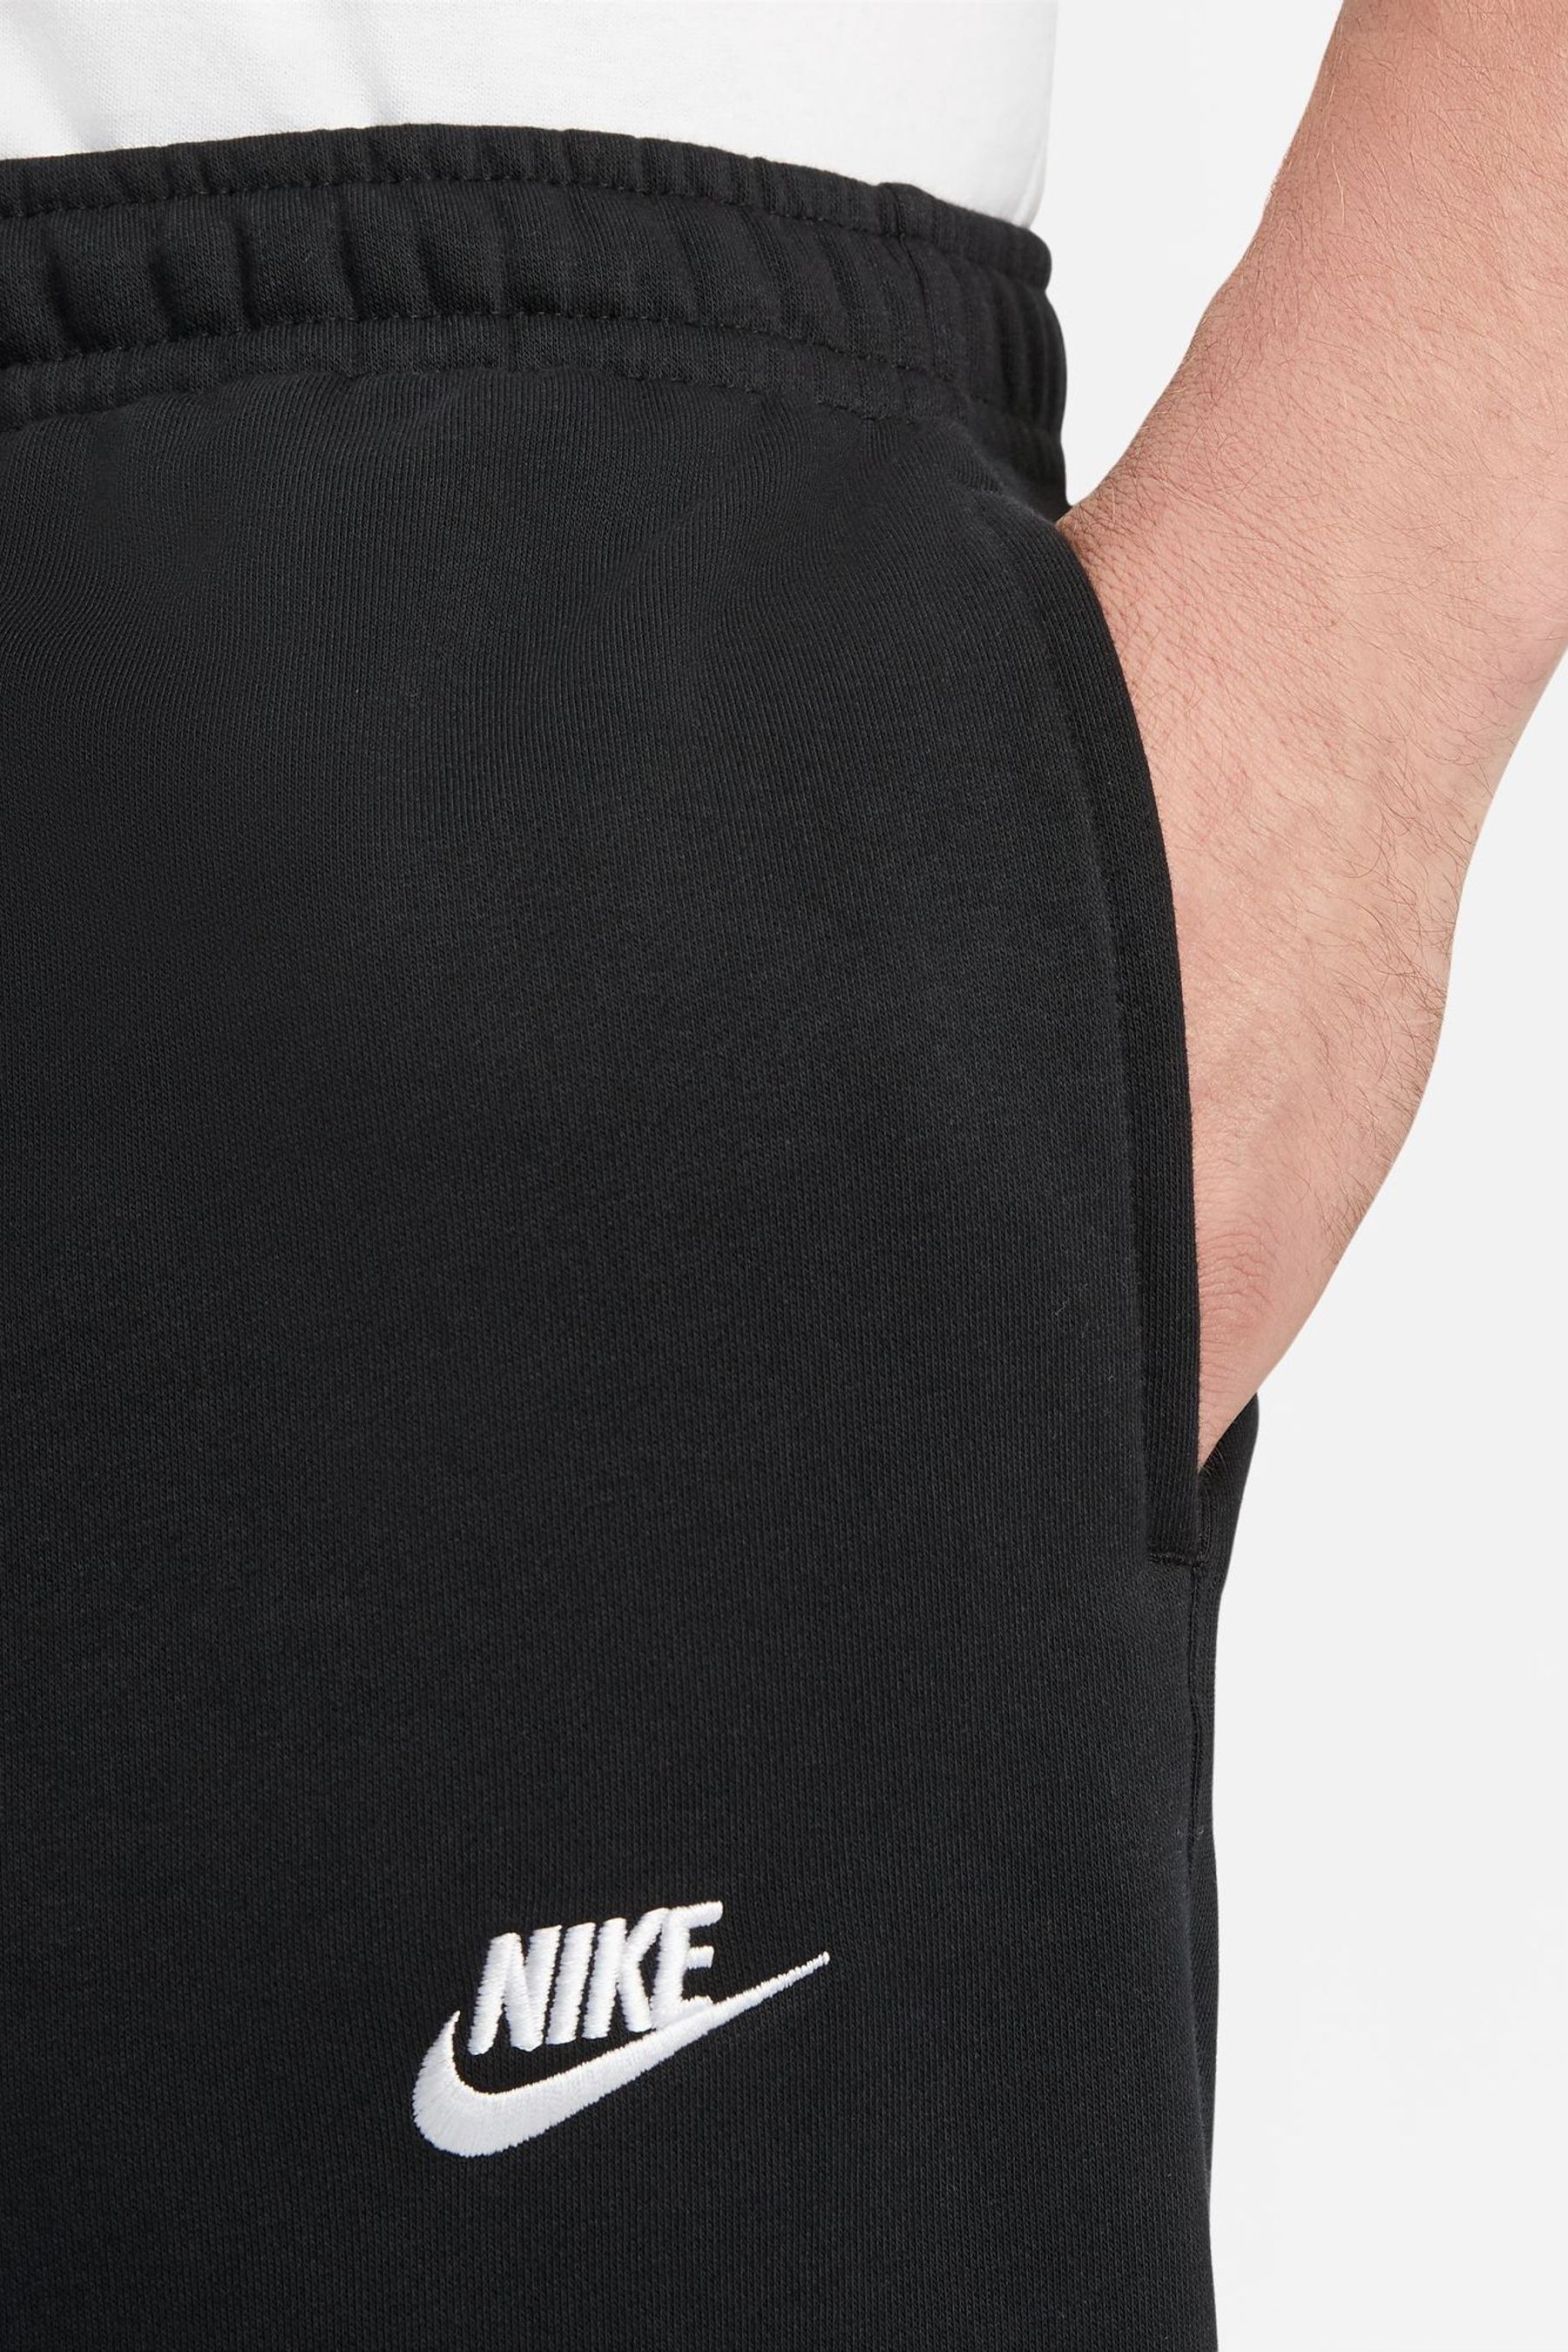 Buy Nike Black Club Cargo Joggers from the Next UK online shop